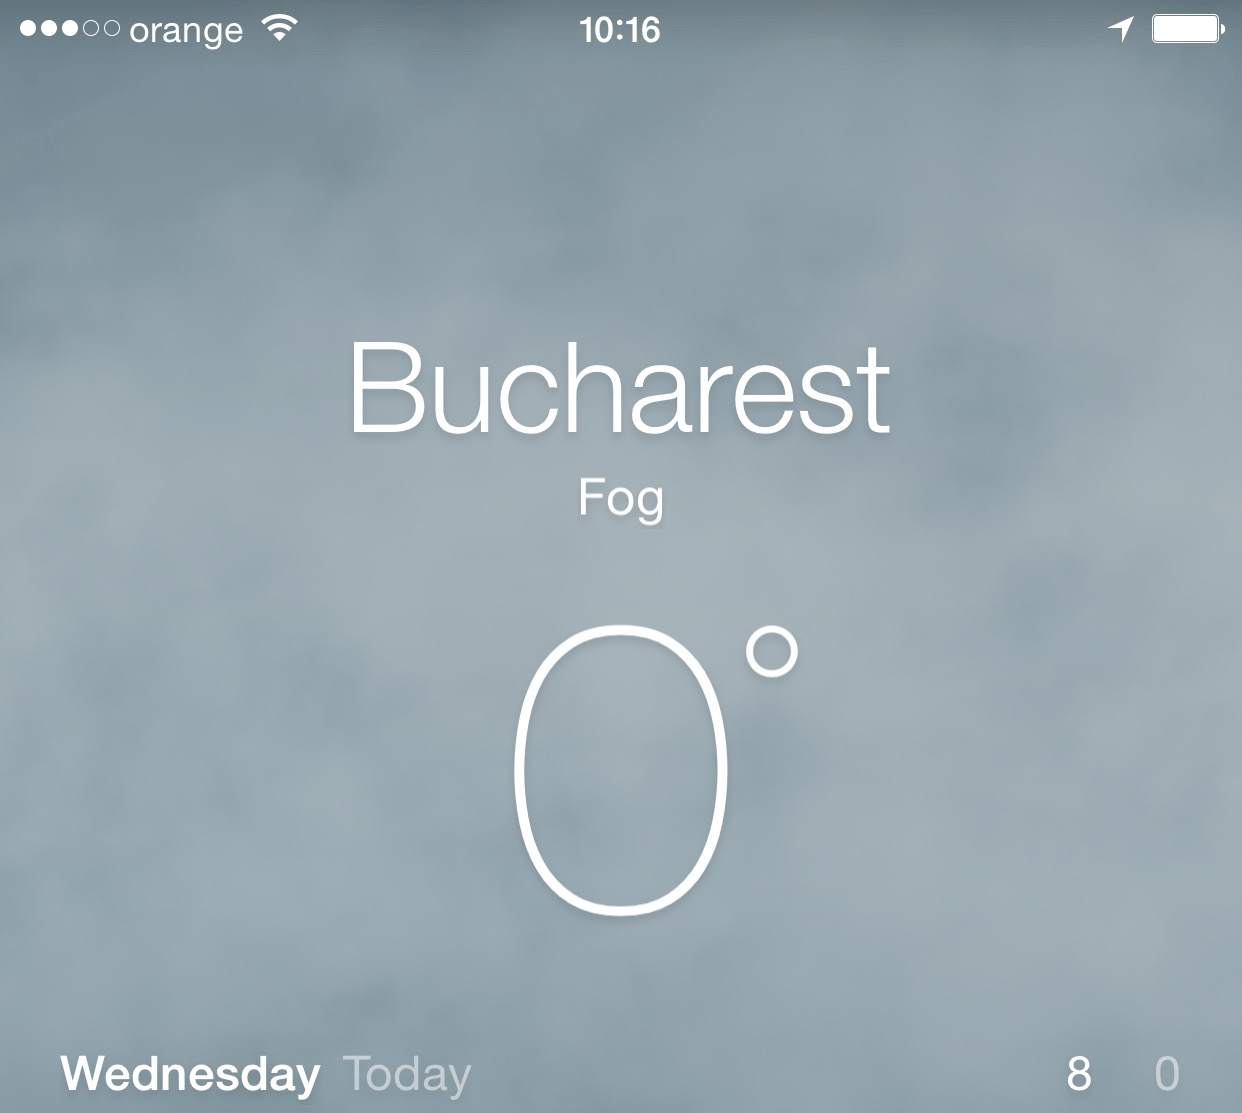 iPhone-Wetter-Apps